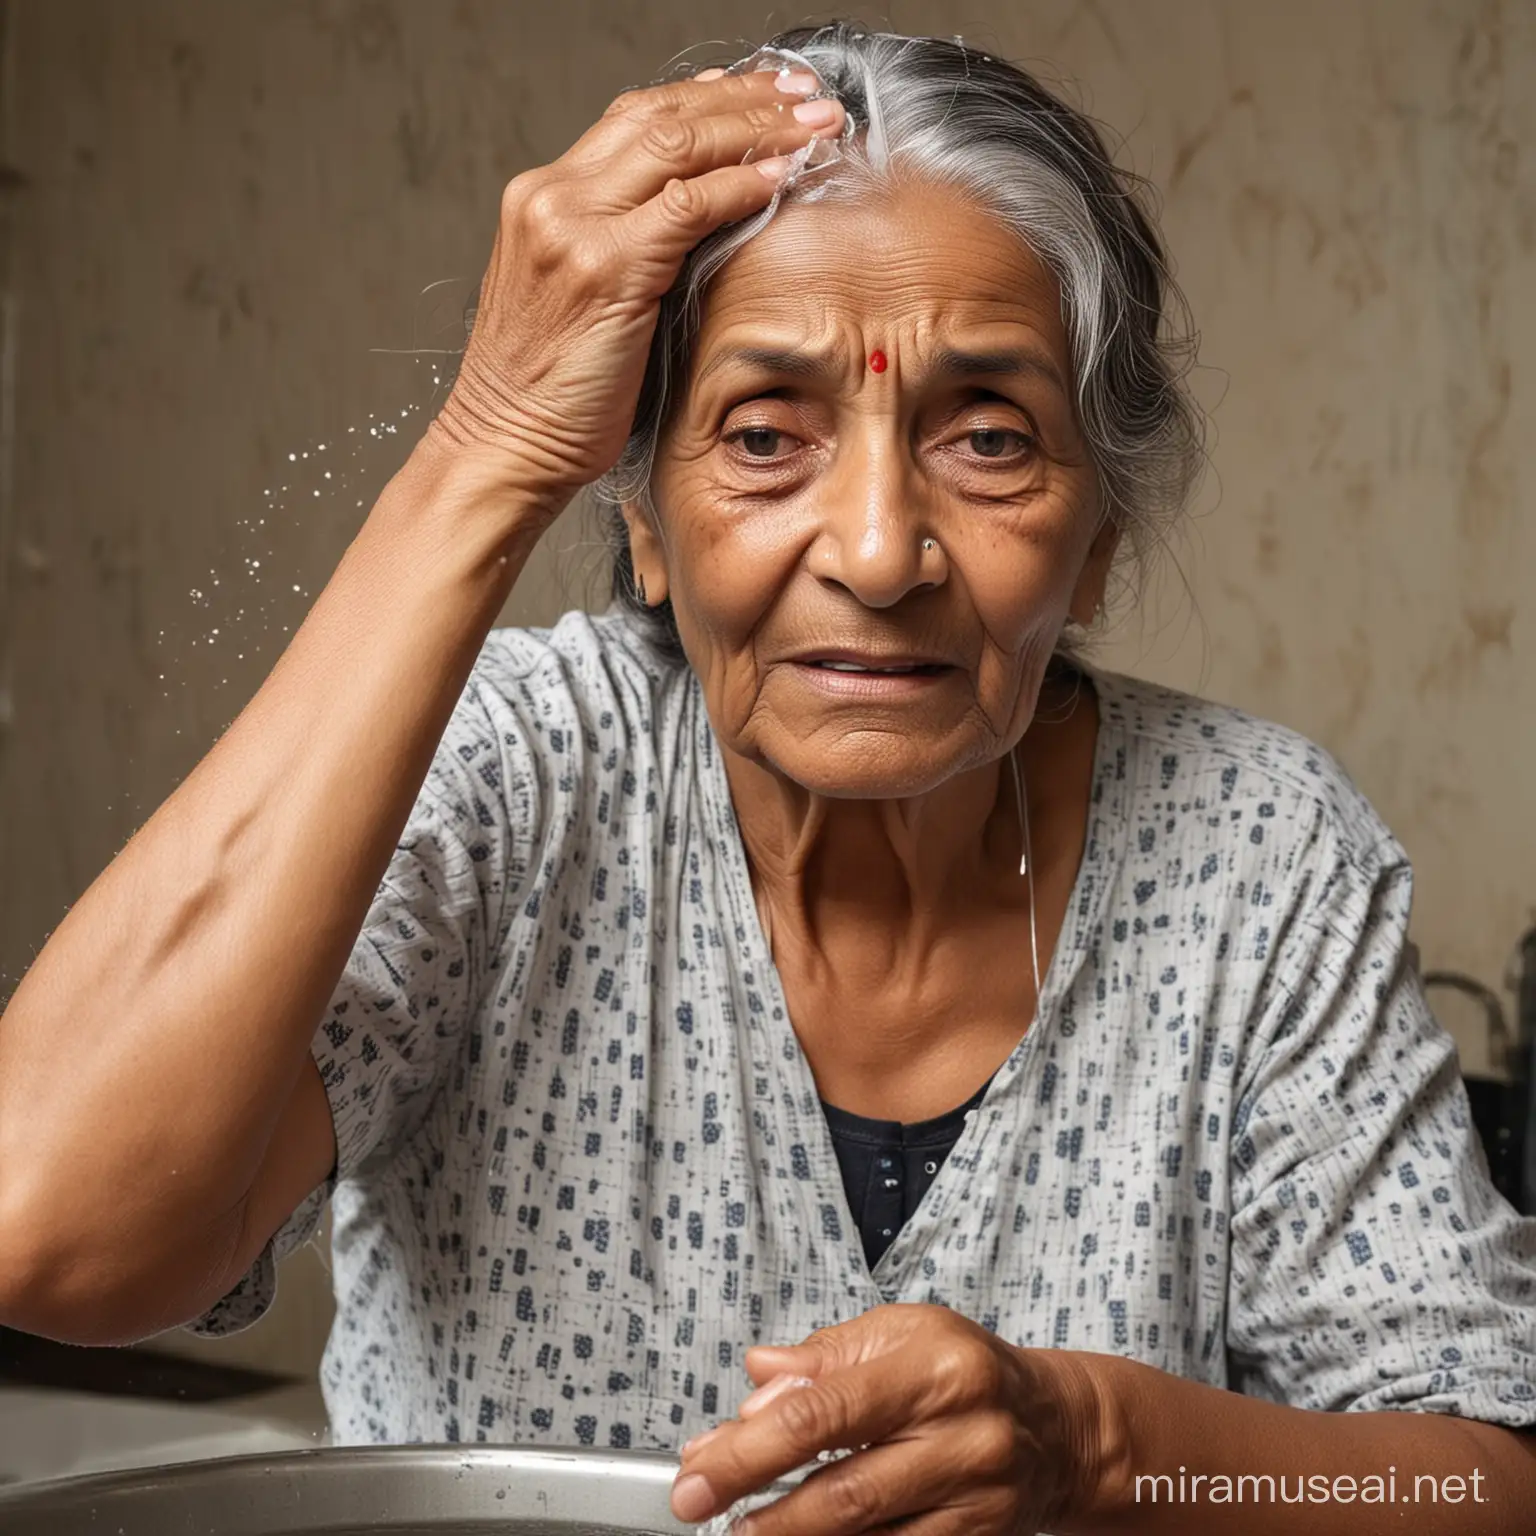 Elderly Indian Woman Surprised by Water Poured on Her Head at Home